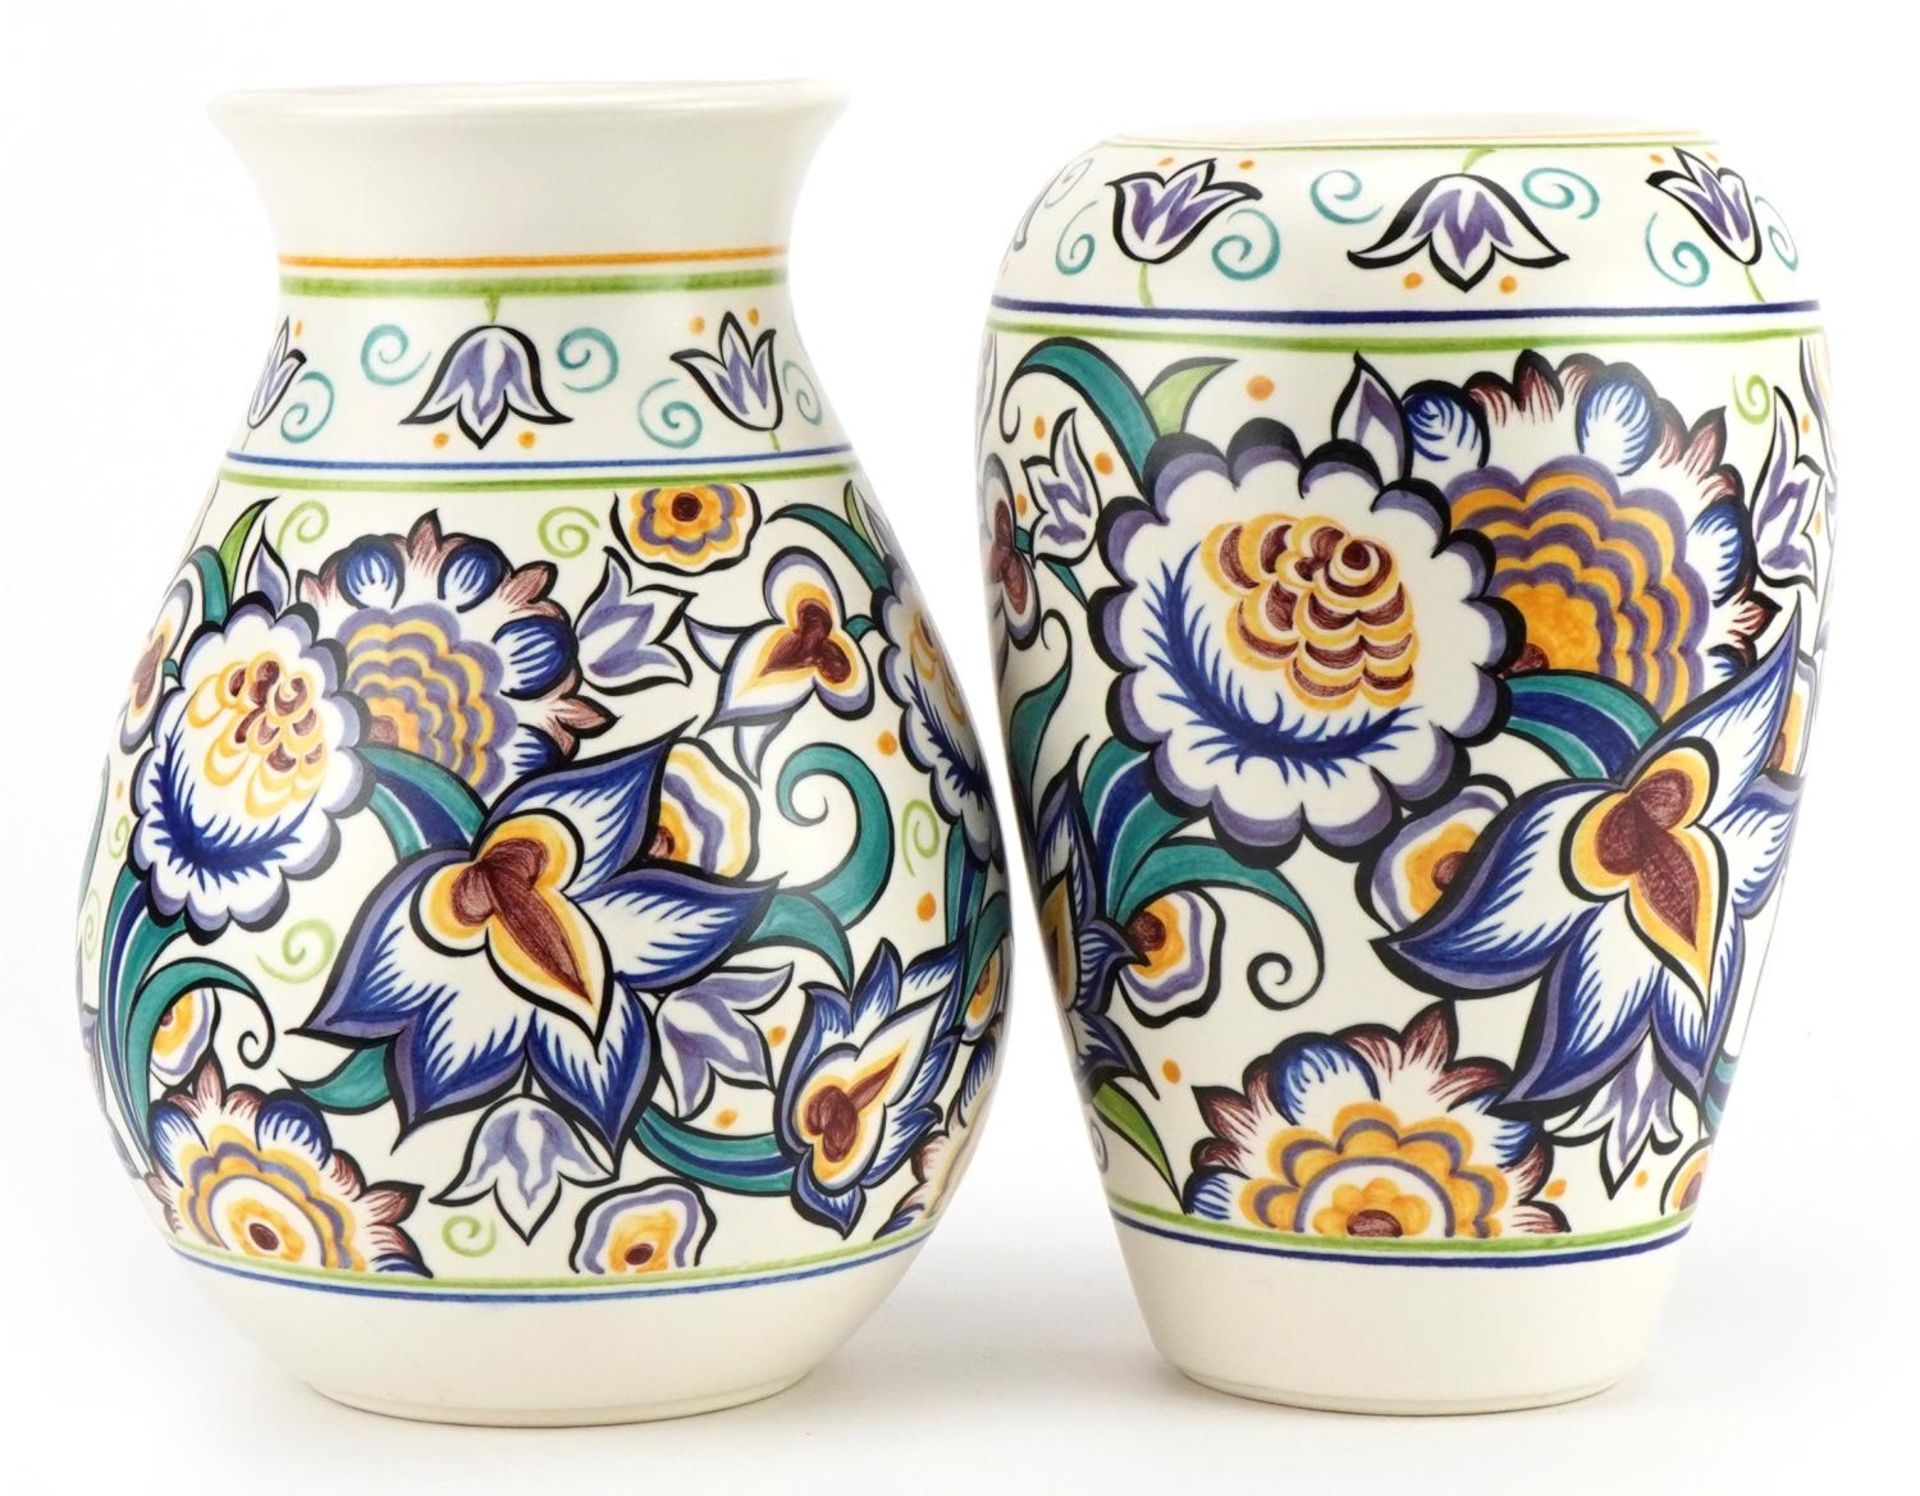 Karen Brown for Poole Pottery, two Mid century studio vases hand painted with stylised flowers in